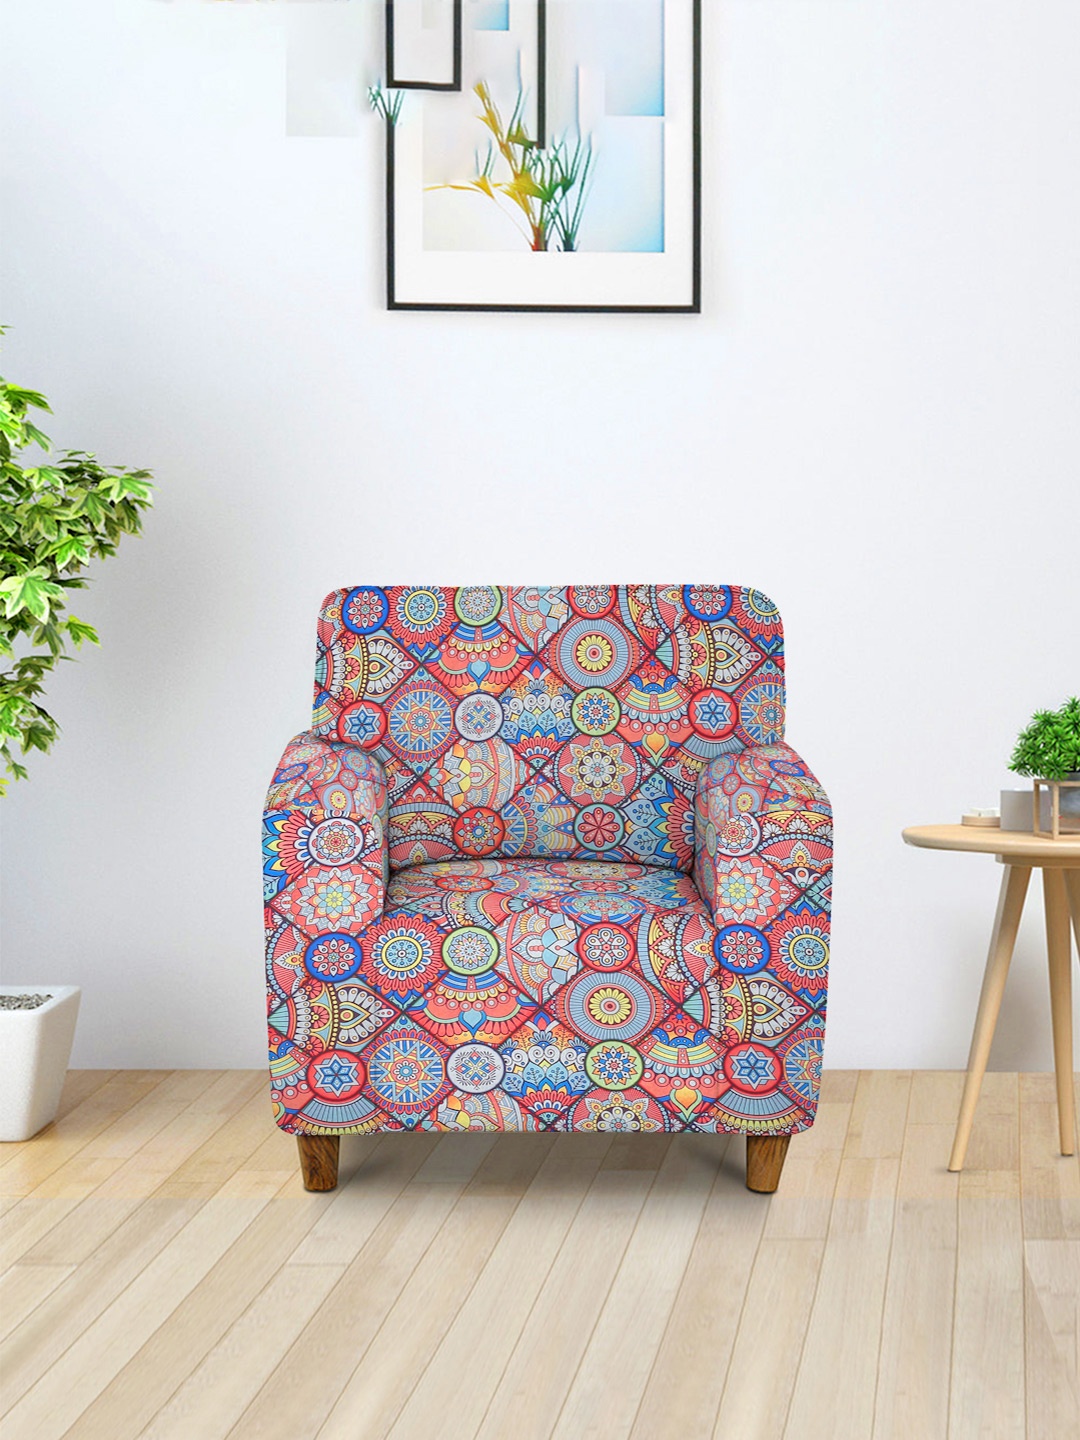 

Cortina Blue & Green Quirky Printed Single Seater Sofa Cover